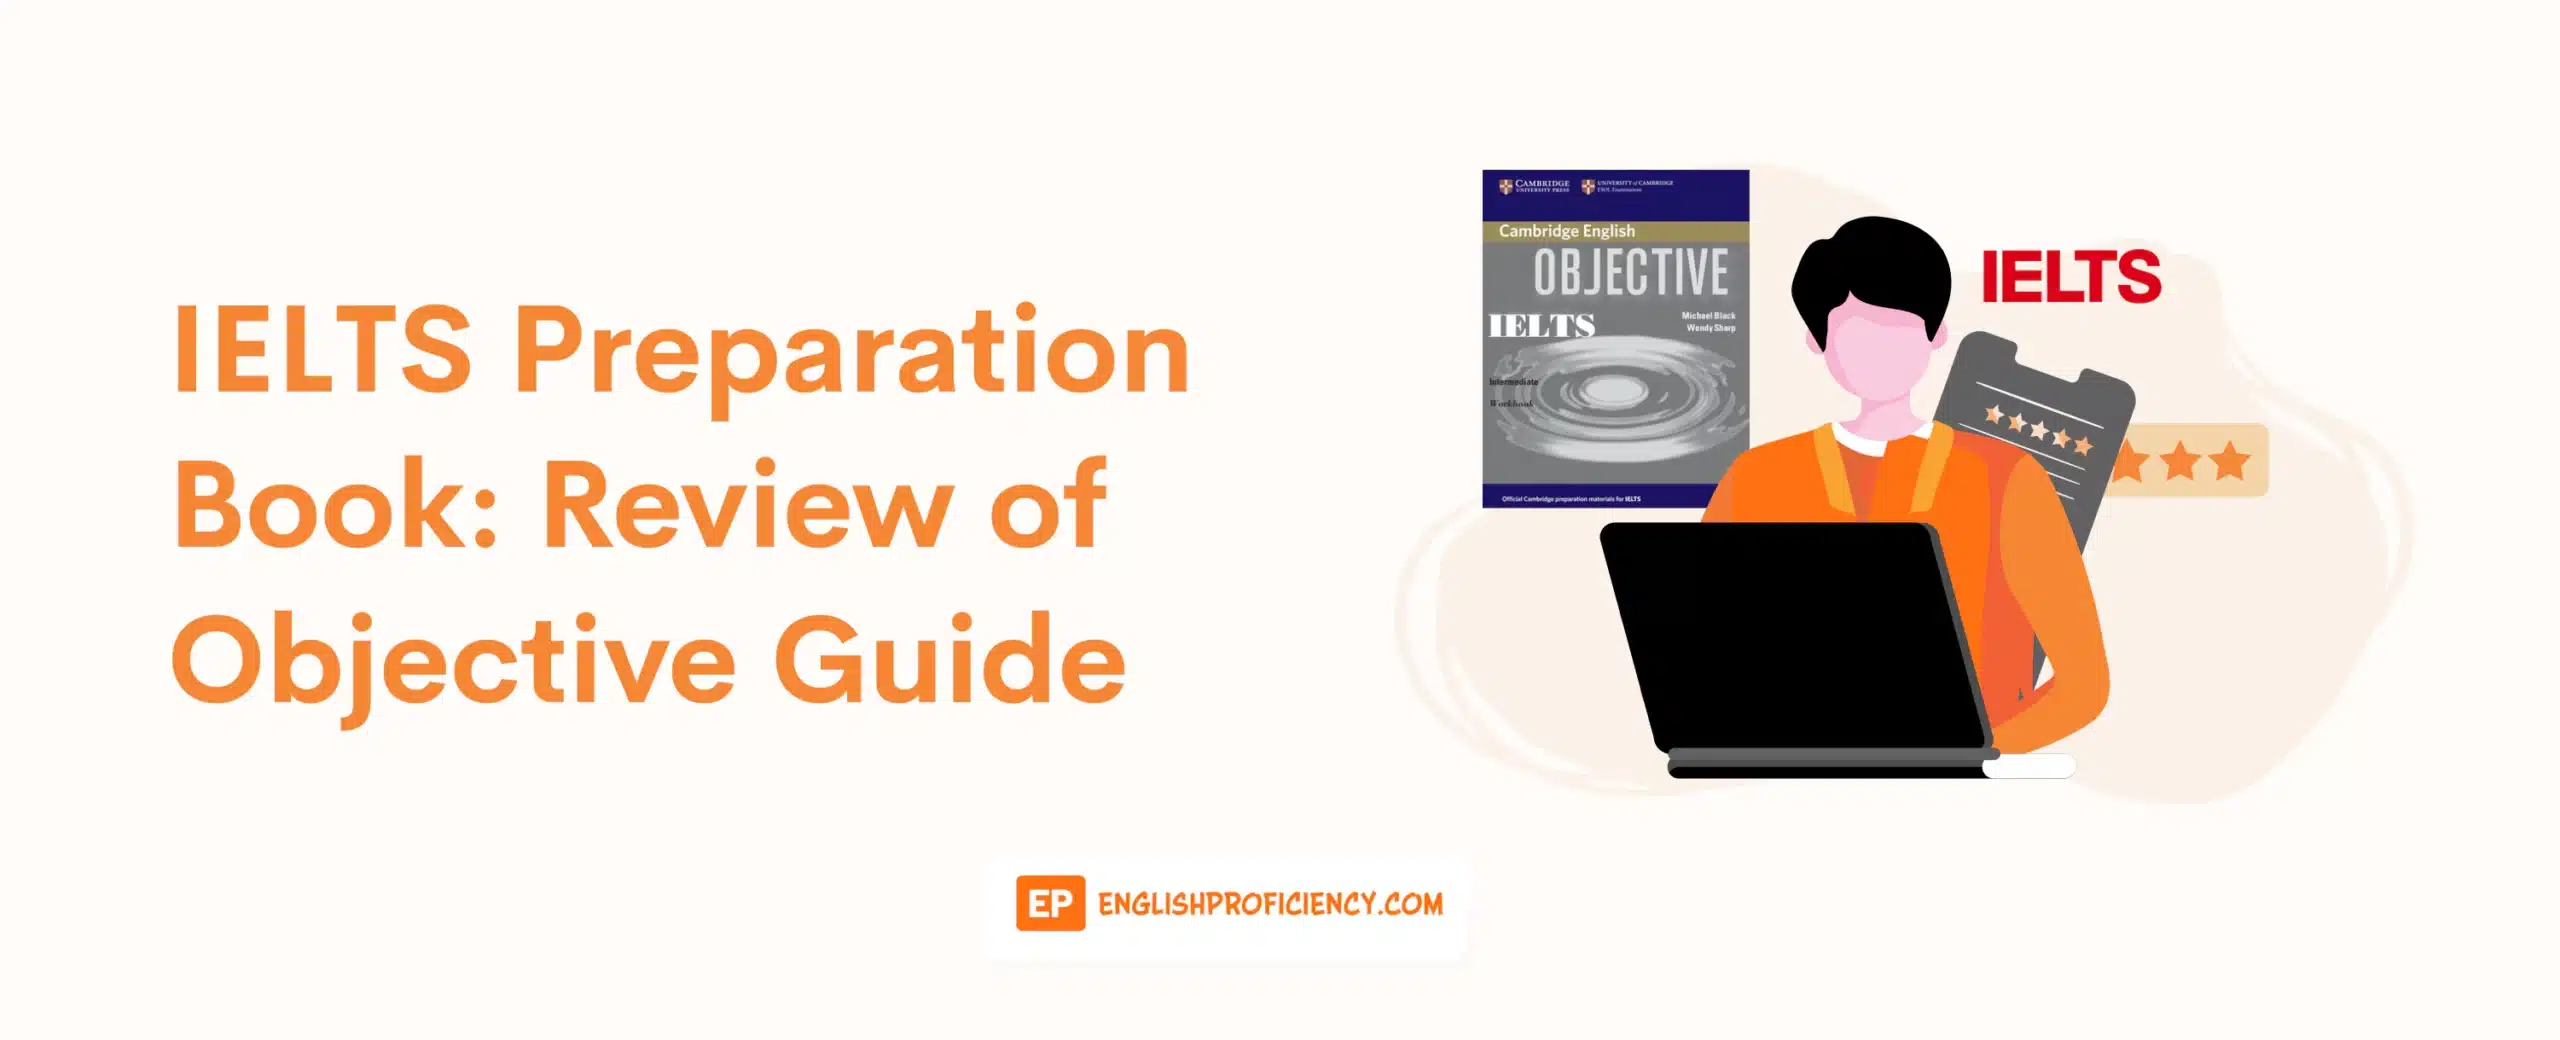 IELTS Preparation Book Review of Objective Guide